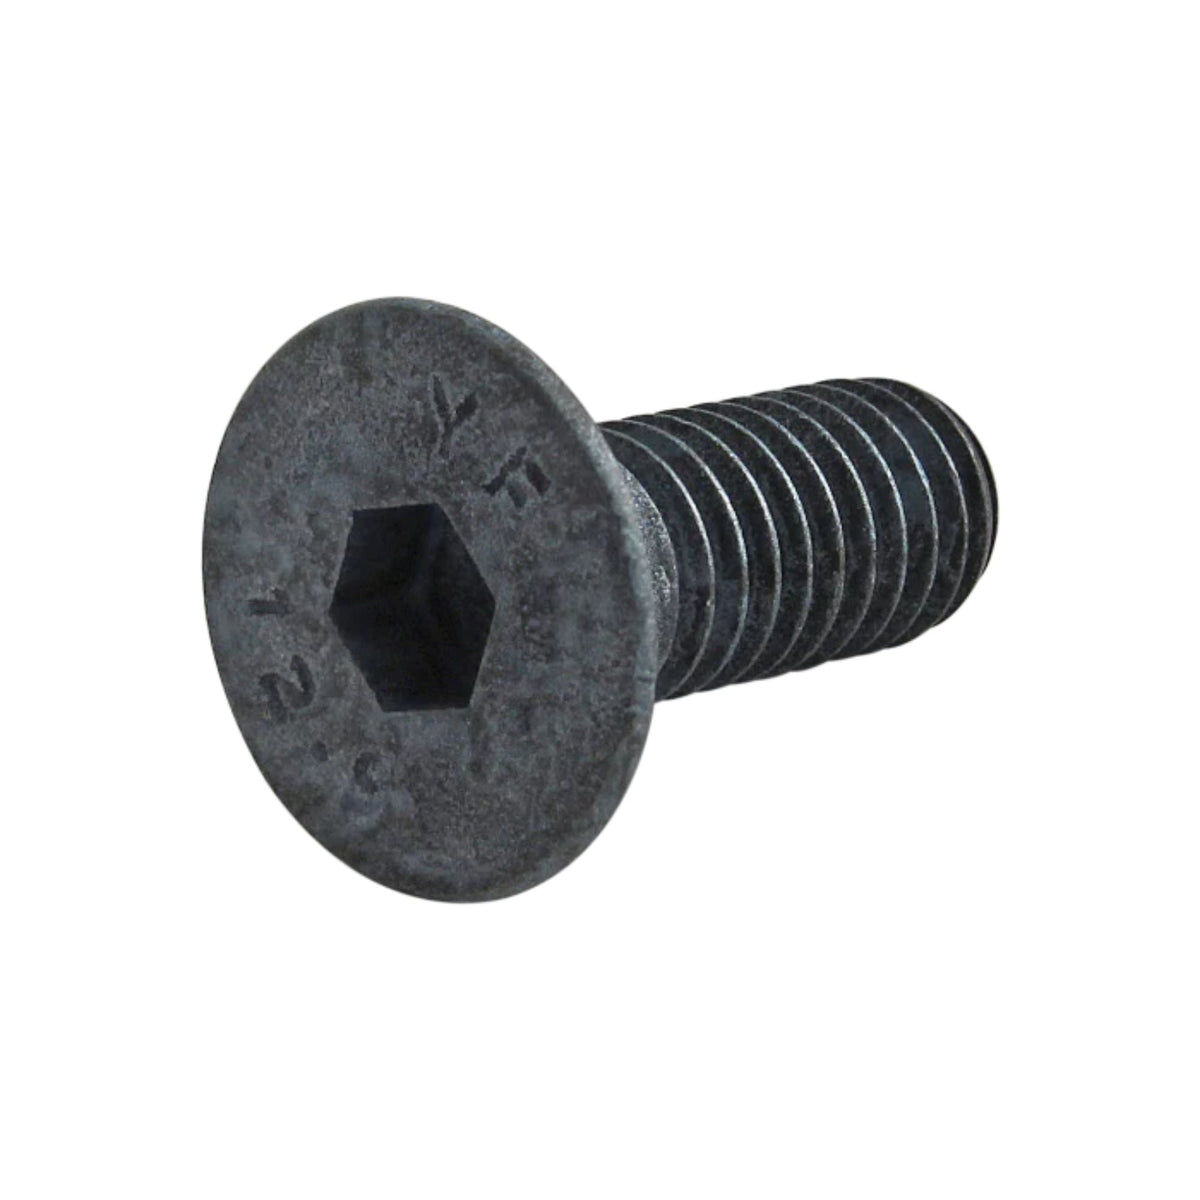 side view of a flat head socket cap screw with the head on the left and threading on the right